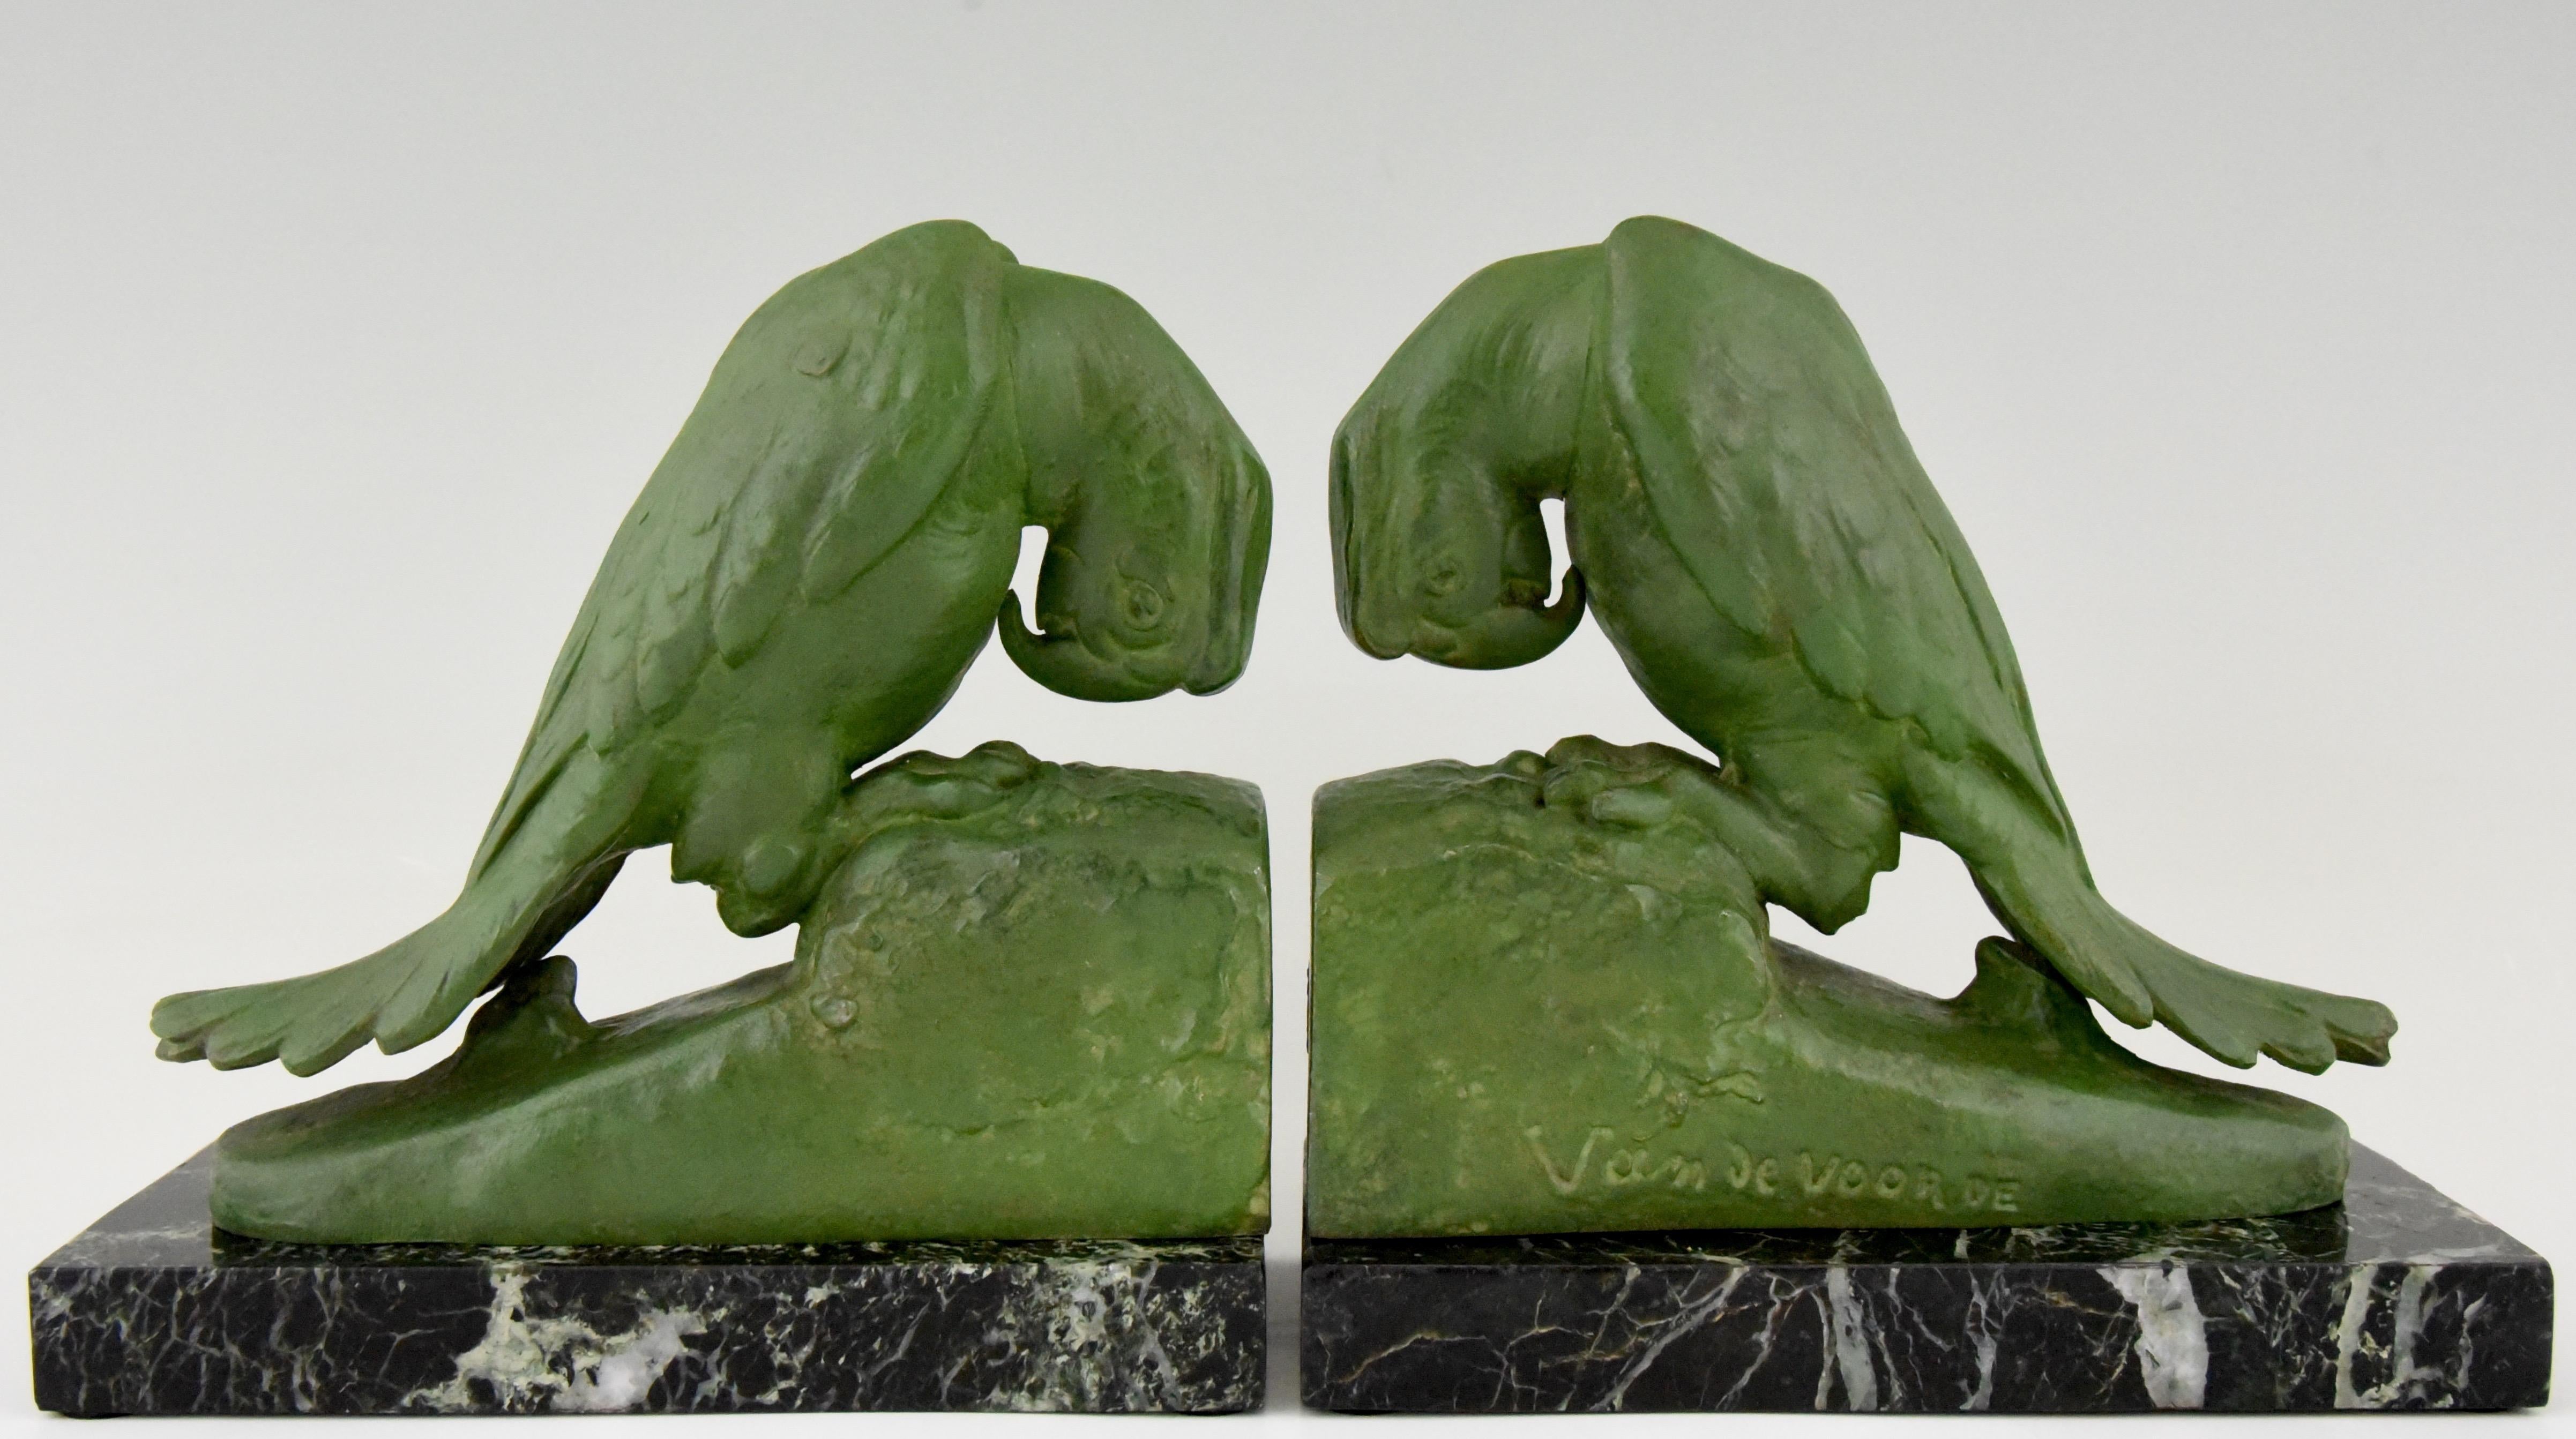 A pair of Art Deco parrot bookends by Georges van de Voorde, Belgian artist who worked in France. Signed and with founders' seal. Lovely green patina, mounted on green marble base, ca. 1925. 

There is a picture of these bookends on page 328 in